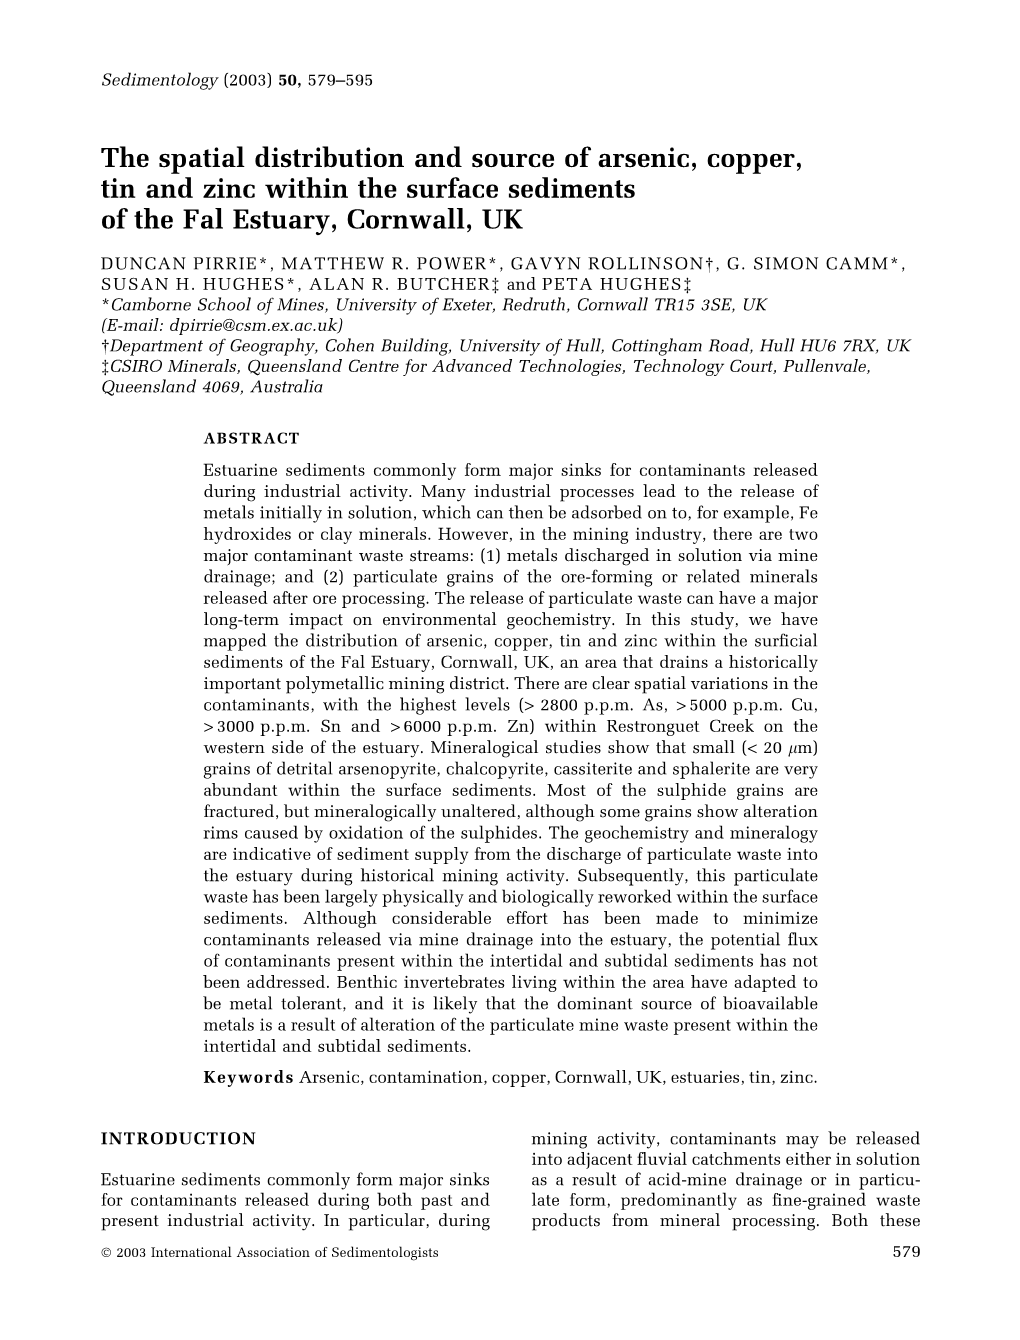 The Spatial Distribution and Source of Arsenic, Copper, Tin and Zinc Within the Surface Sediments of the Fal Estuary, Cornwall, UK